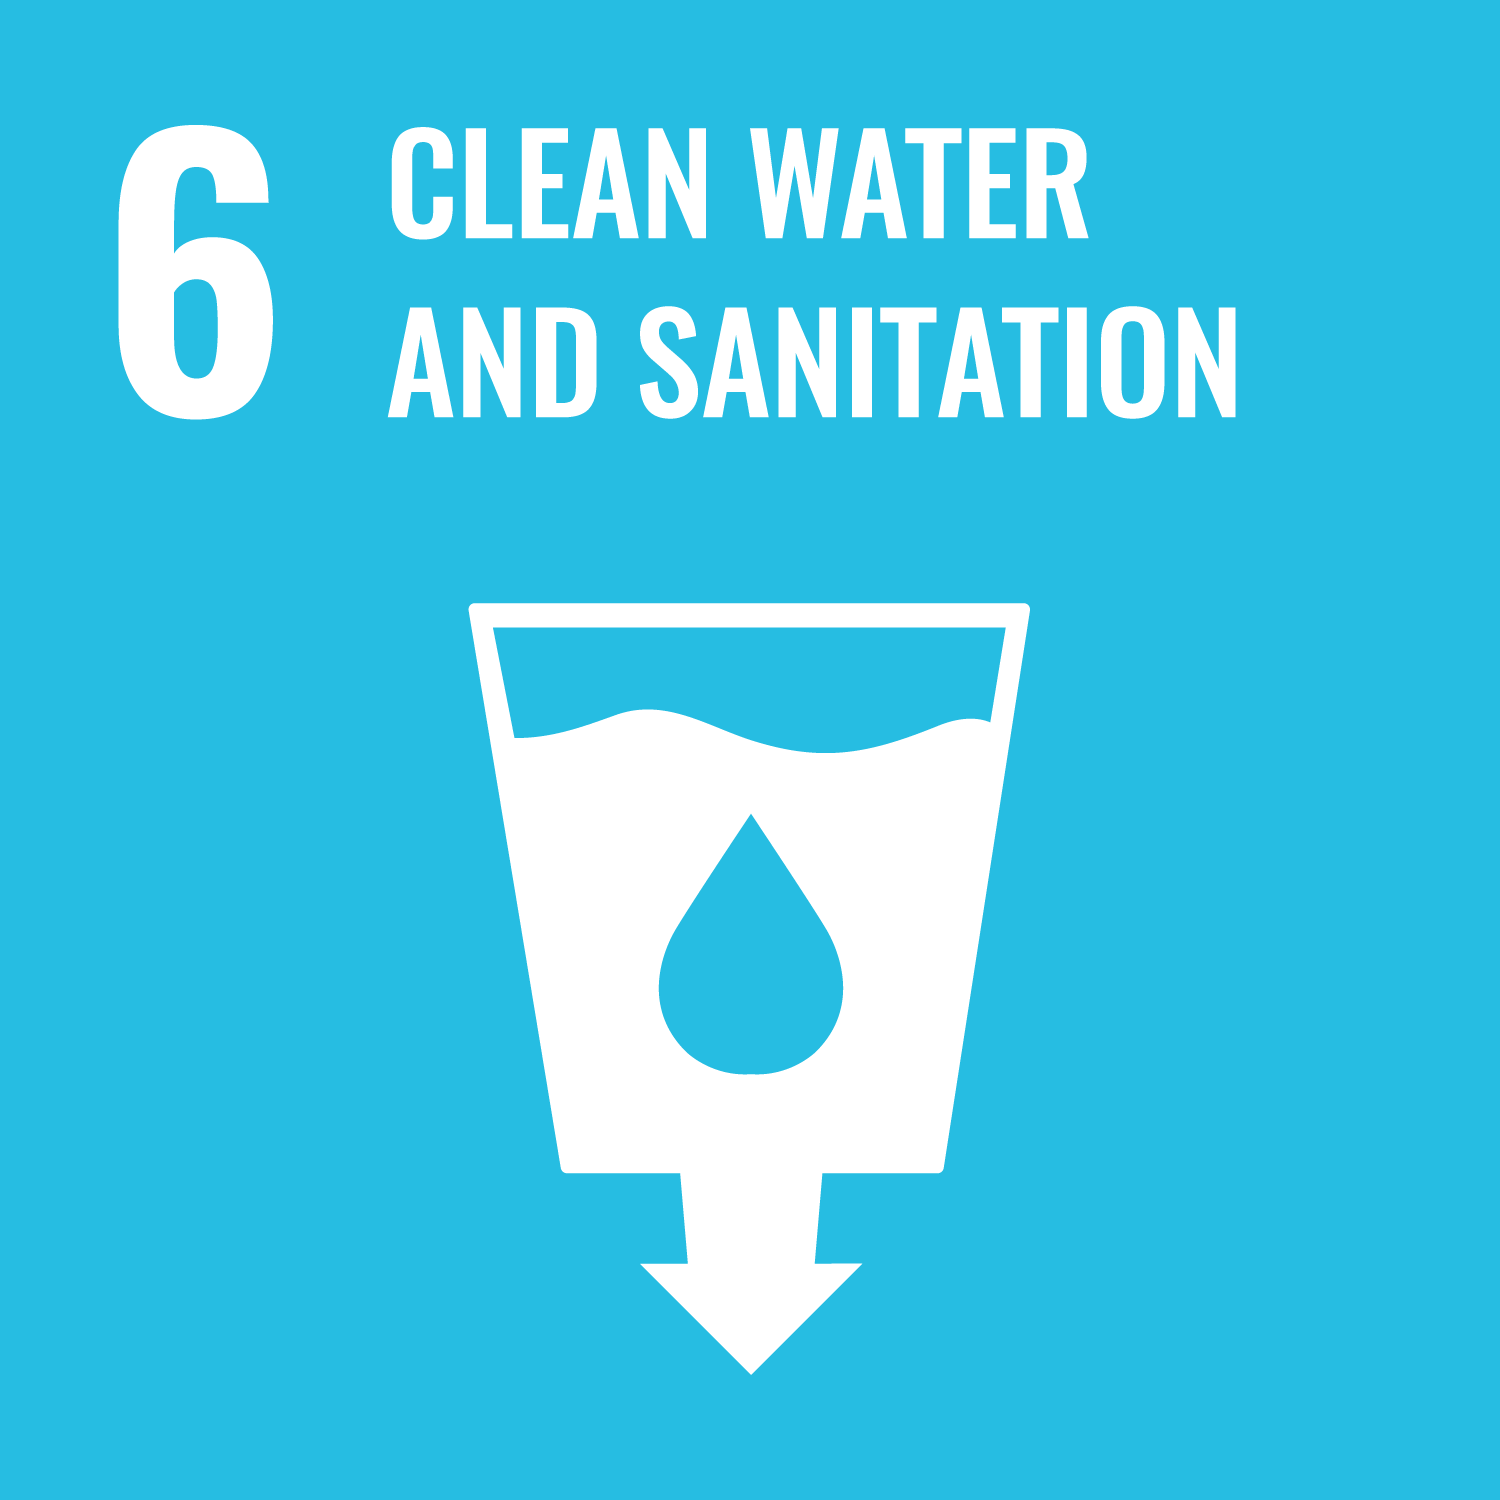 Sustainable Development Goal 06 logo: Clean water and sanitation